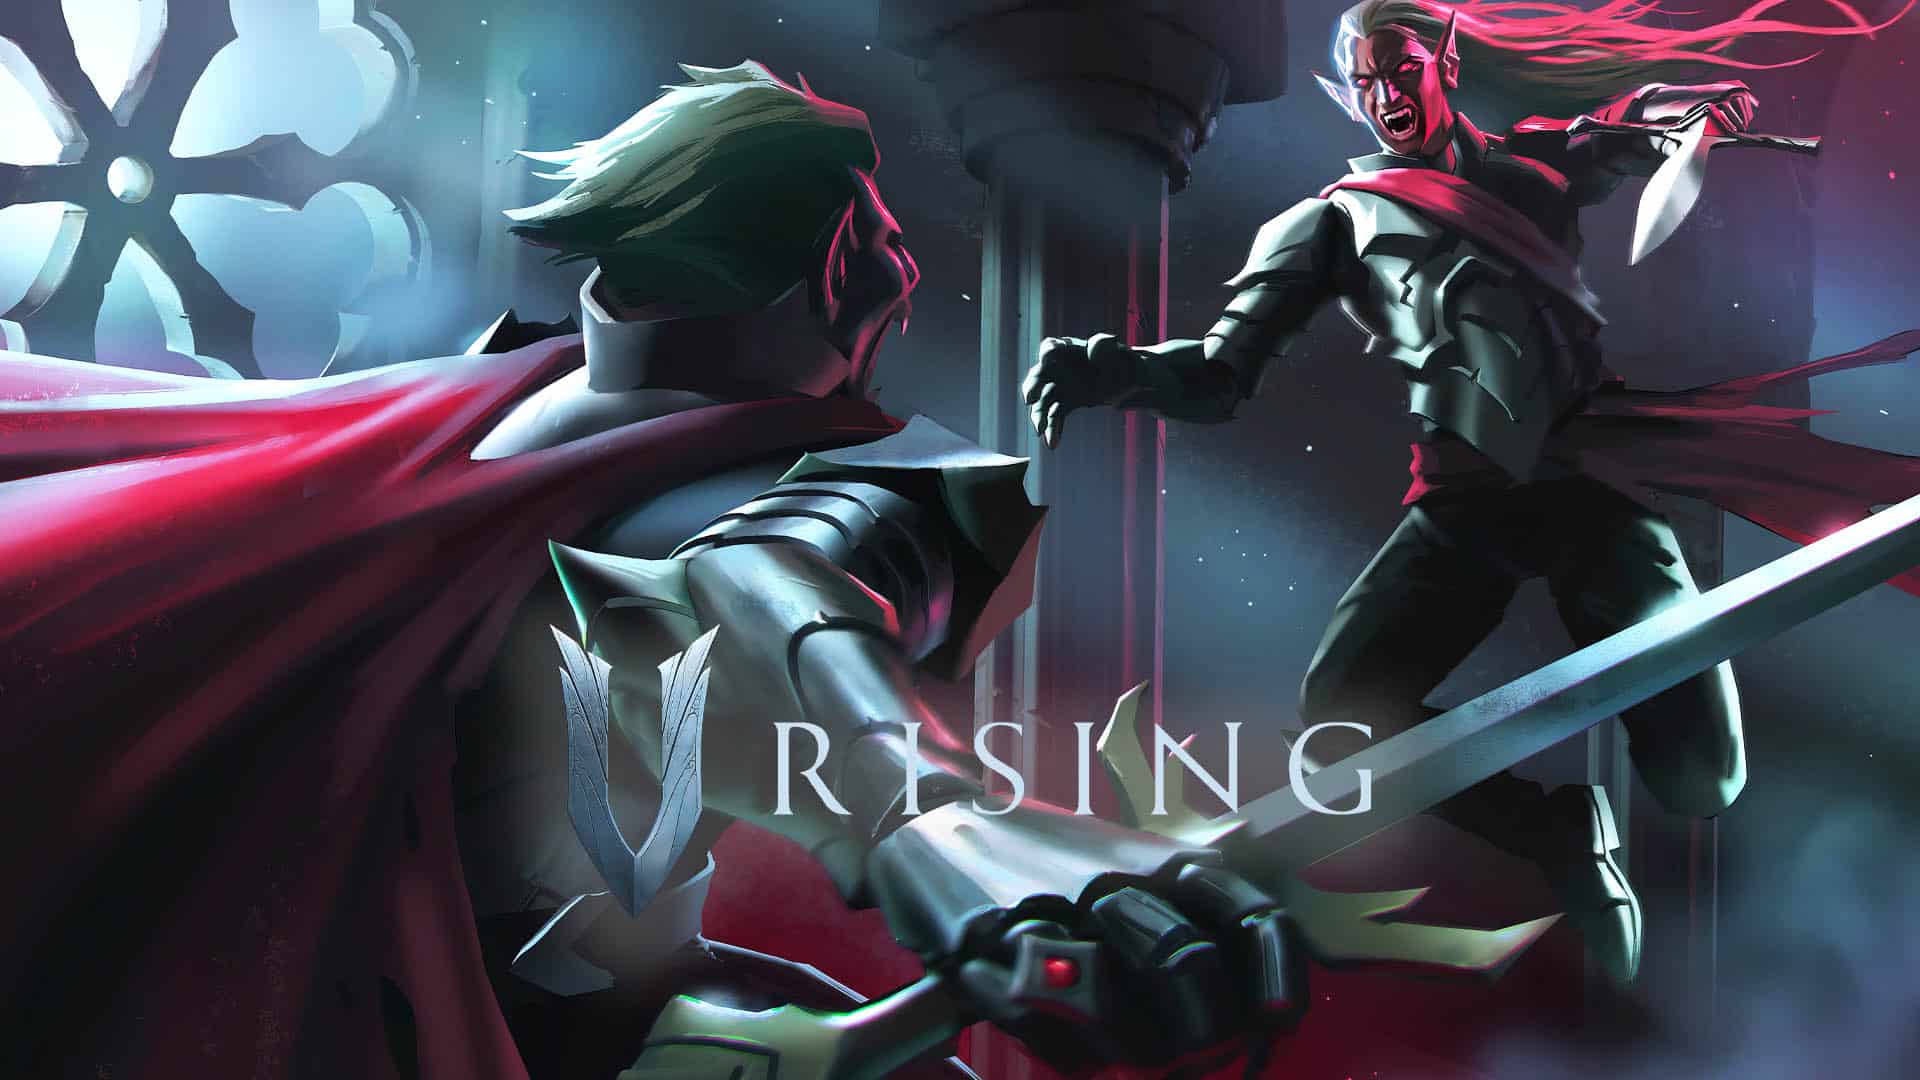 V Rising Patch Notes 0.5.11821 - June 9